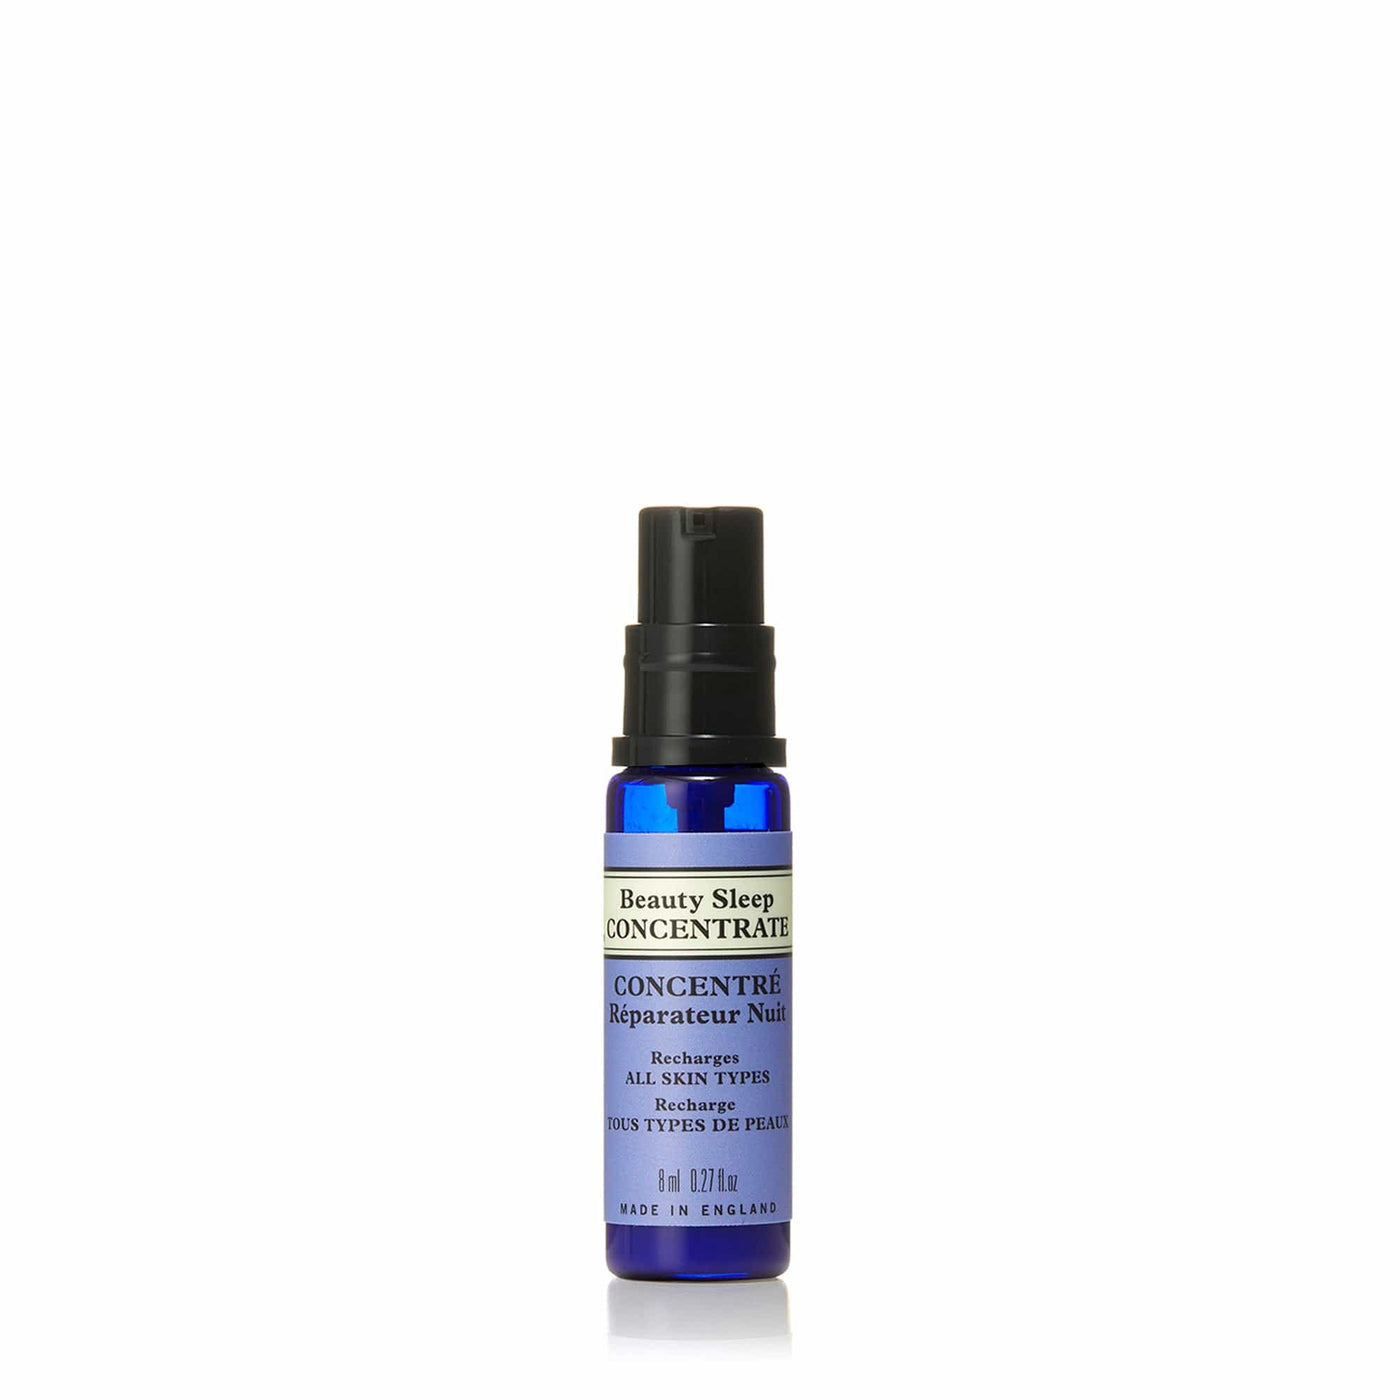 Neal's Yard Remedies Beauty Sleep Concentrate 8ml